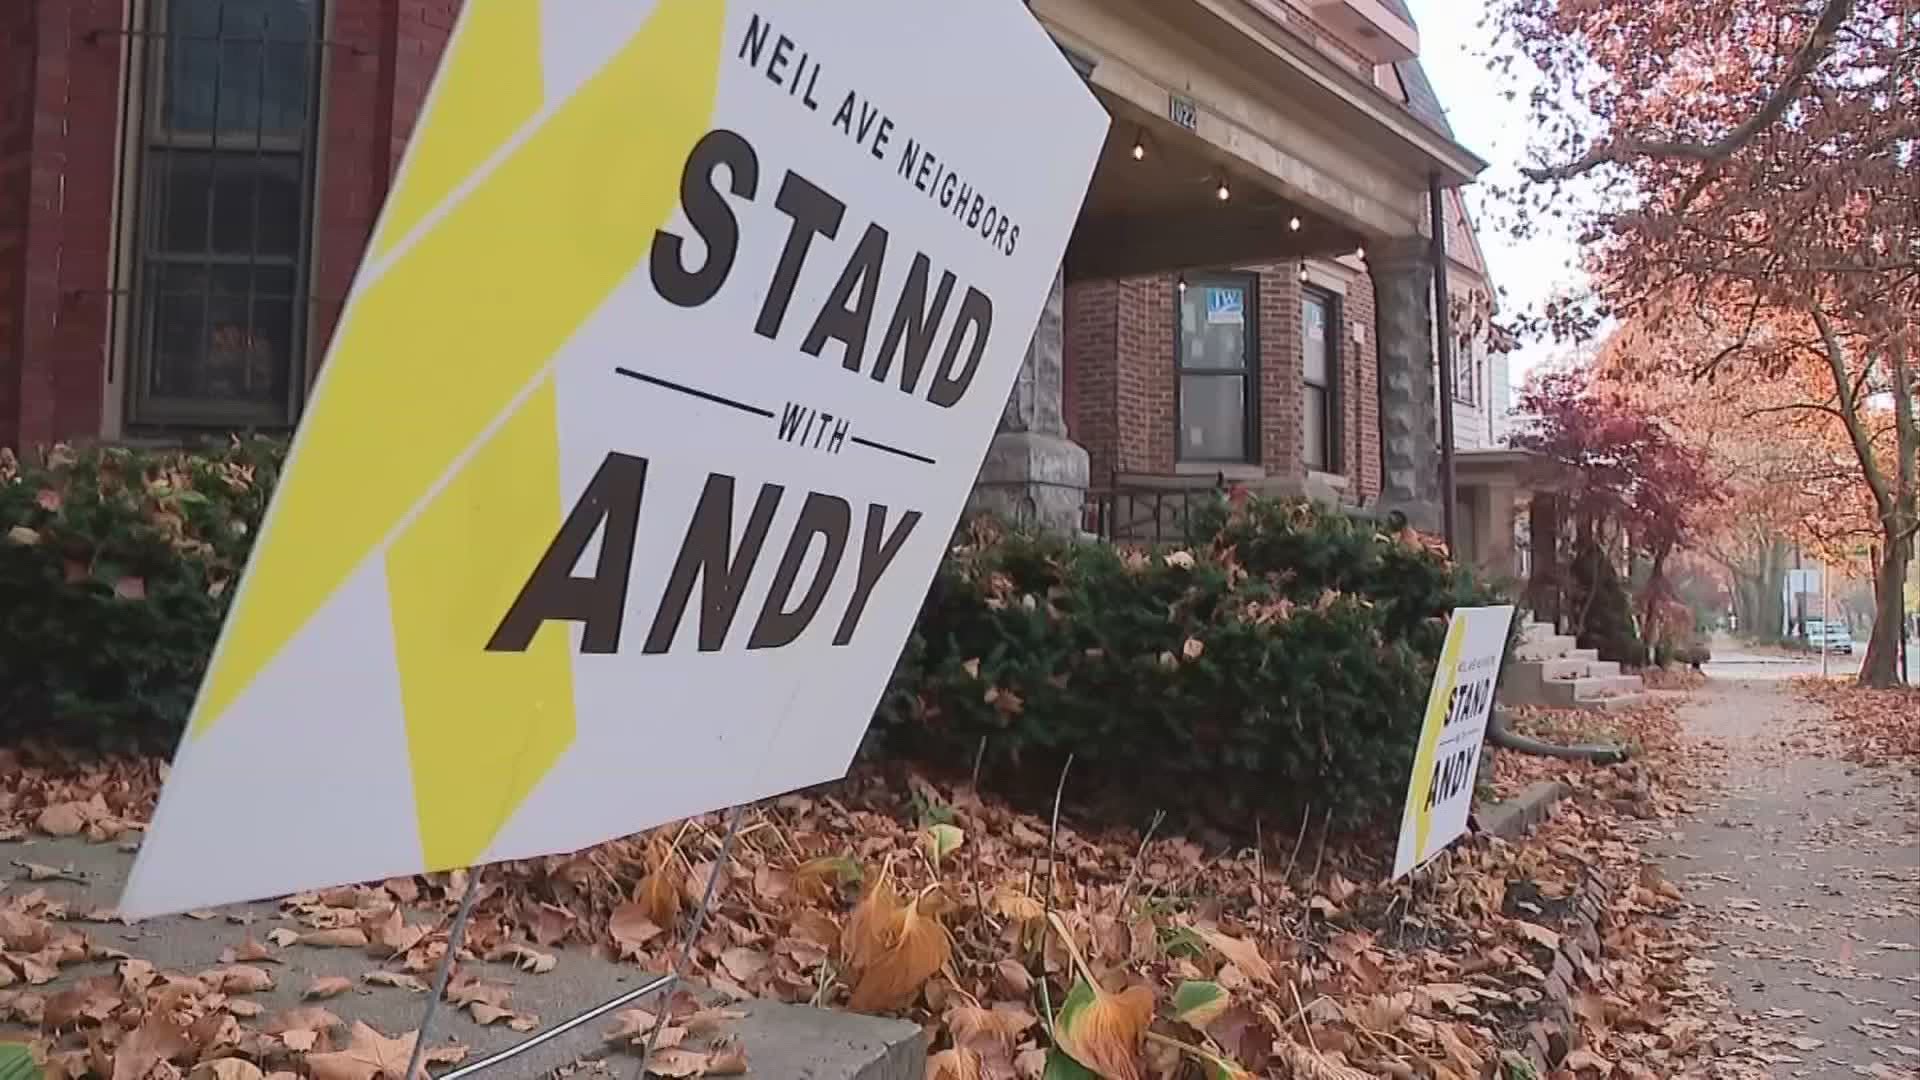 Neighbors along Neil Avenue started a sign campaign to show support for Andy, who has sarcoma.